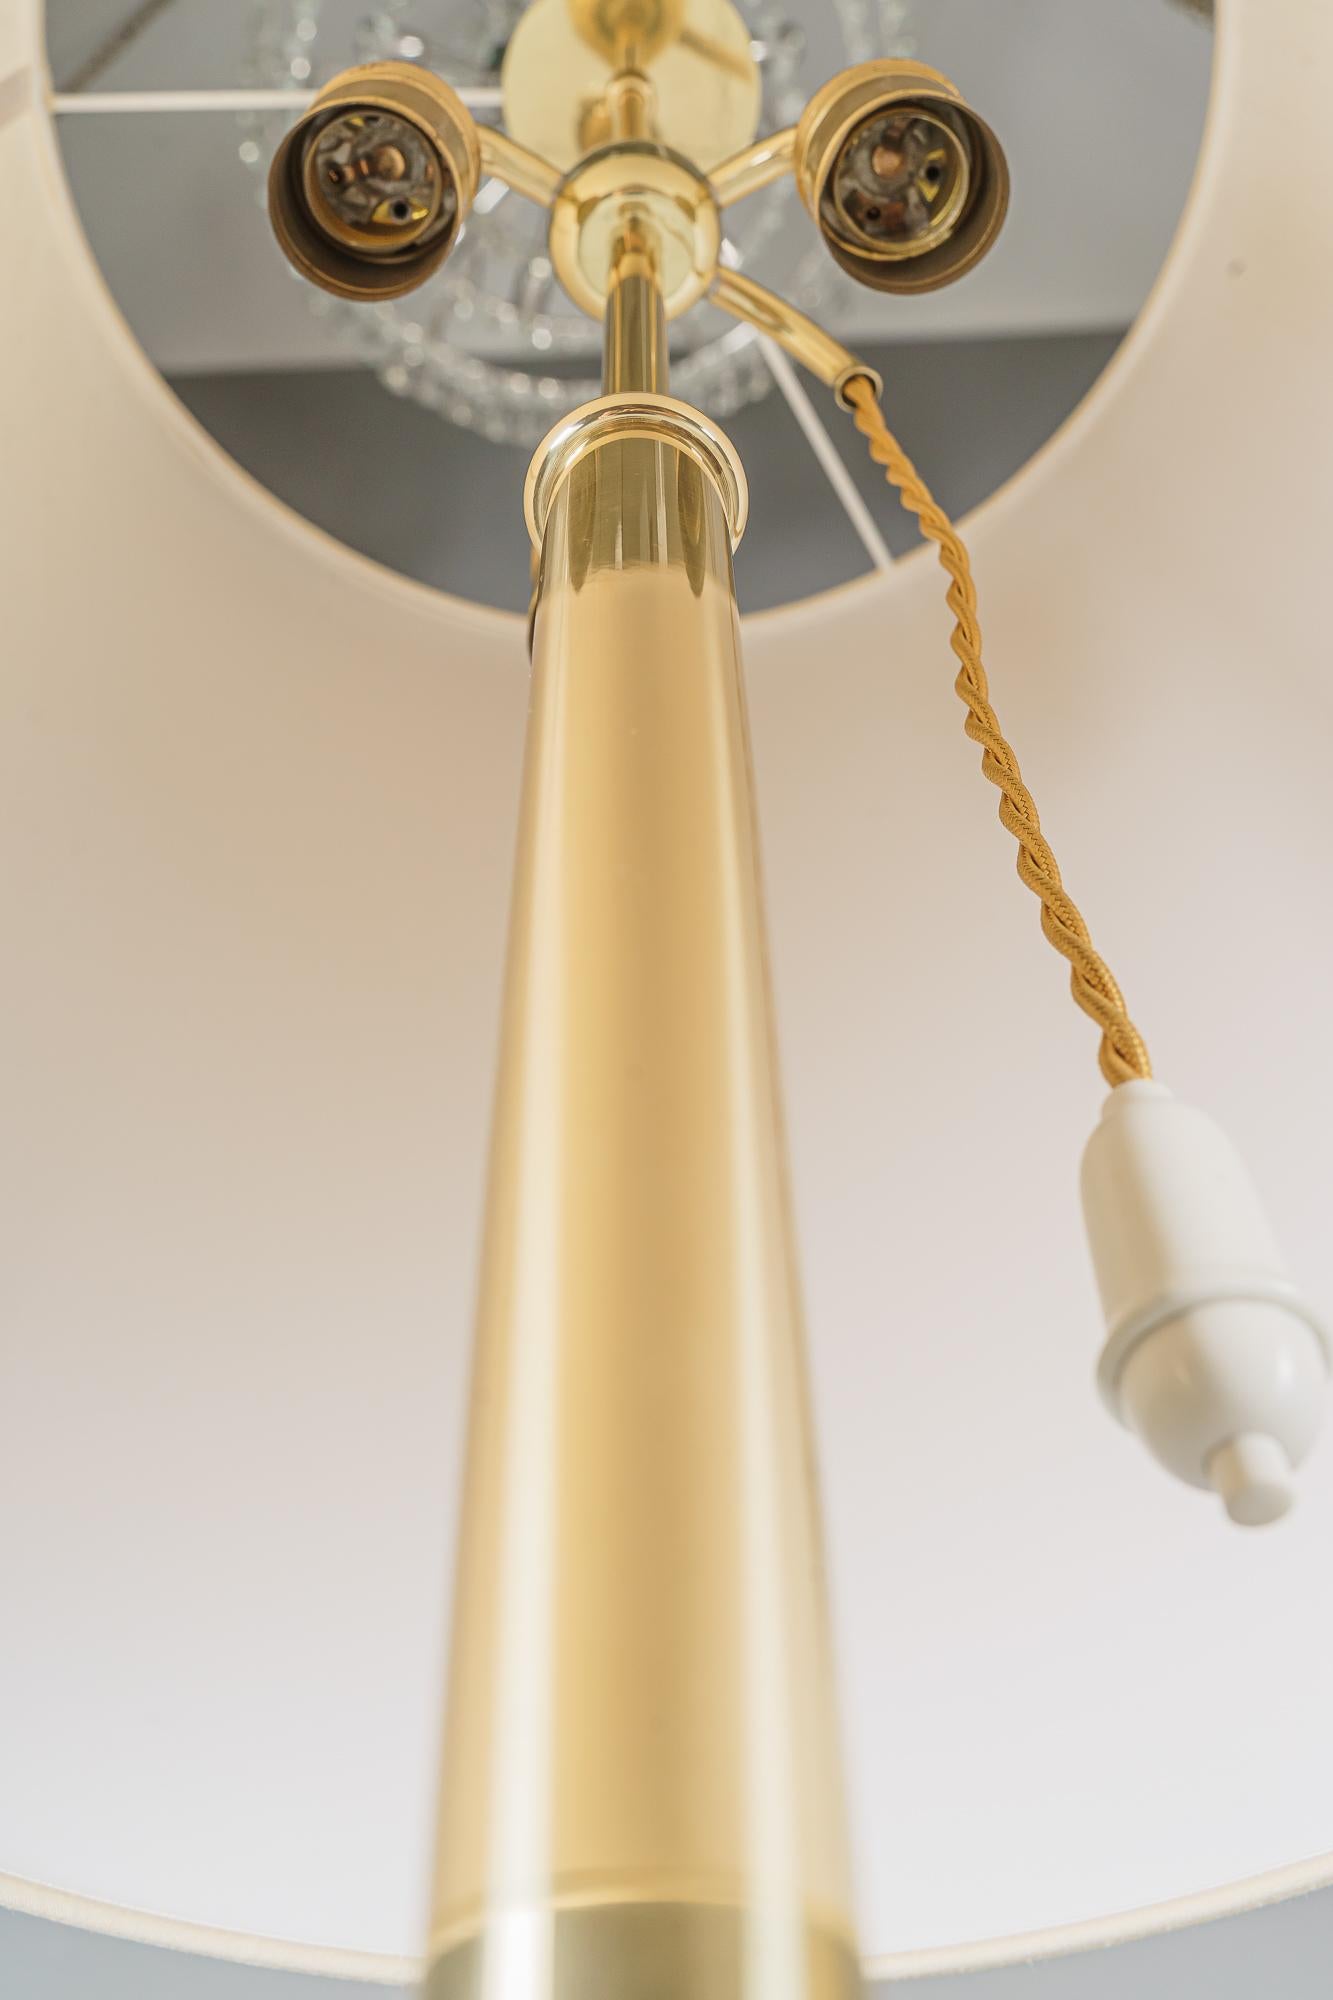 Polished Pair of Large J.T. Kalmar Floor Lamps 'Helios' Mod. 2035, Brass 1960s For Sale